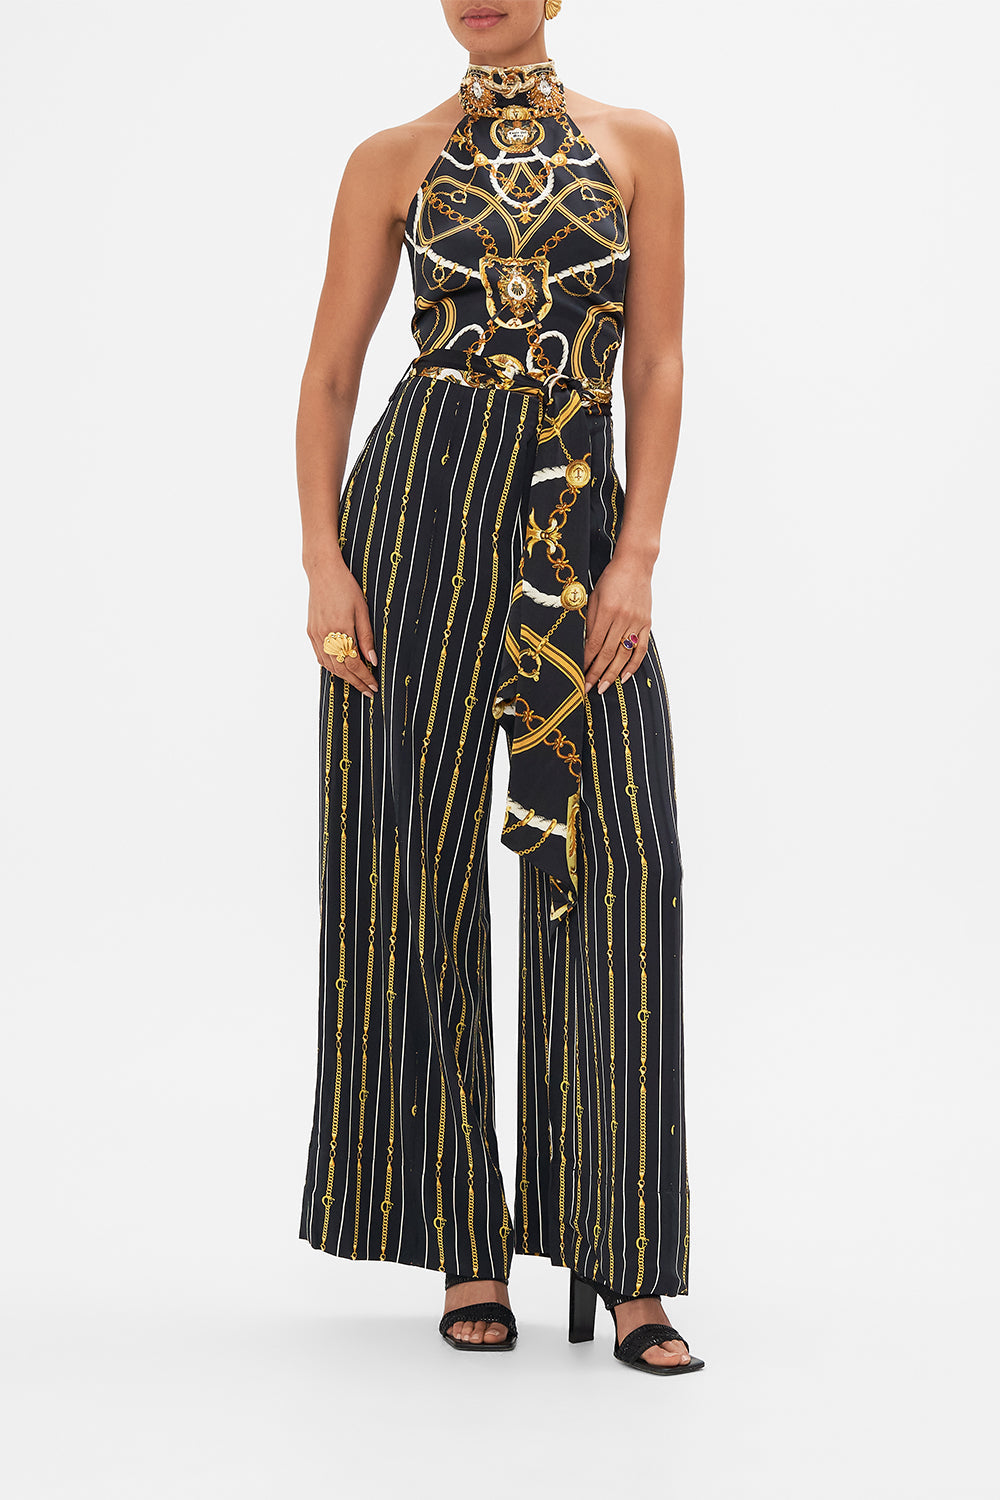 Front view of model wearing CAMILLA silk wide leg pant in Coast to Coast print